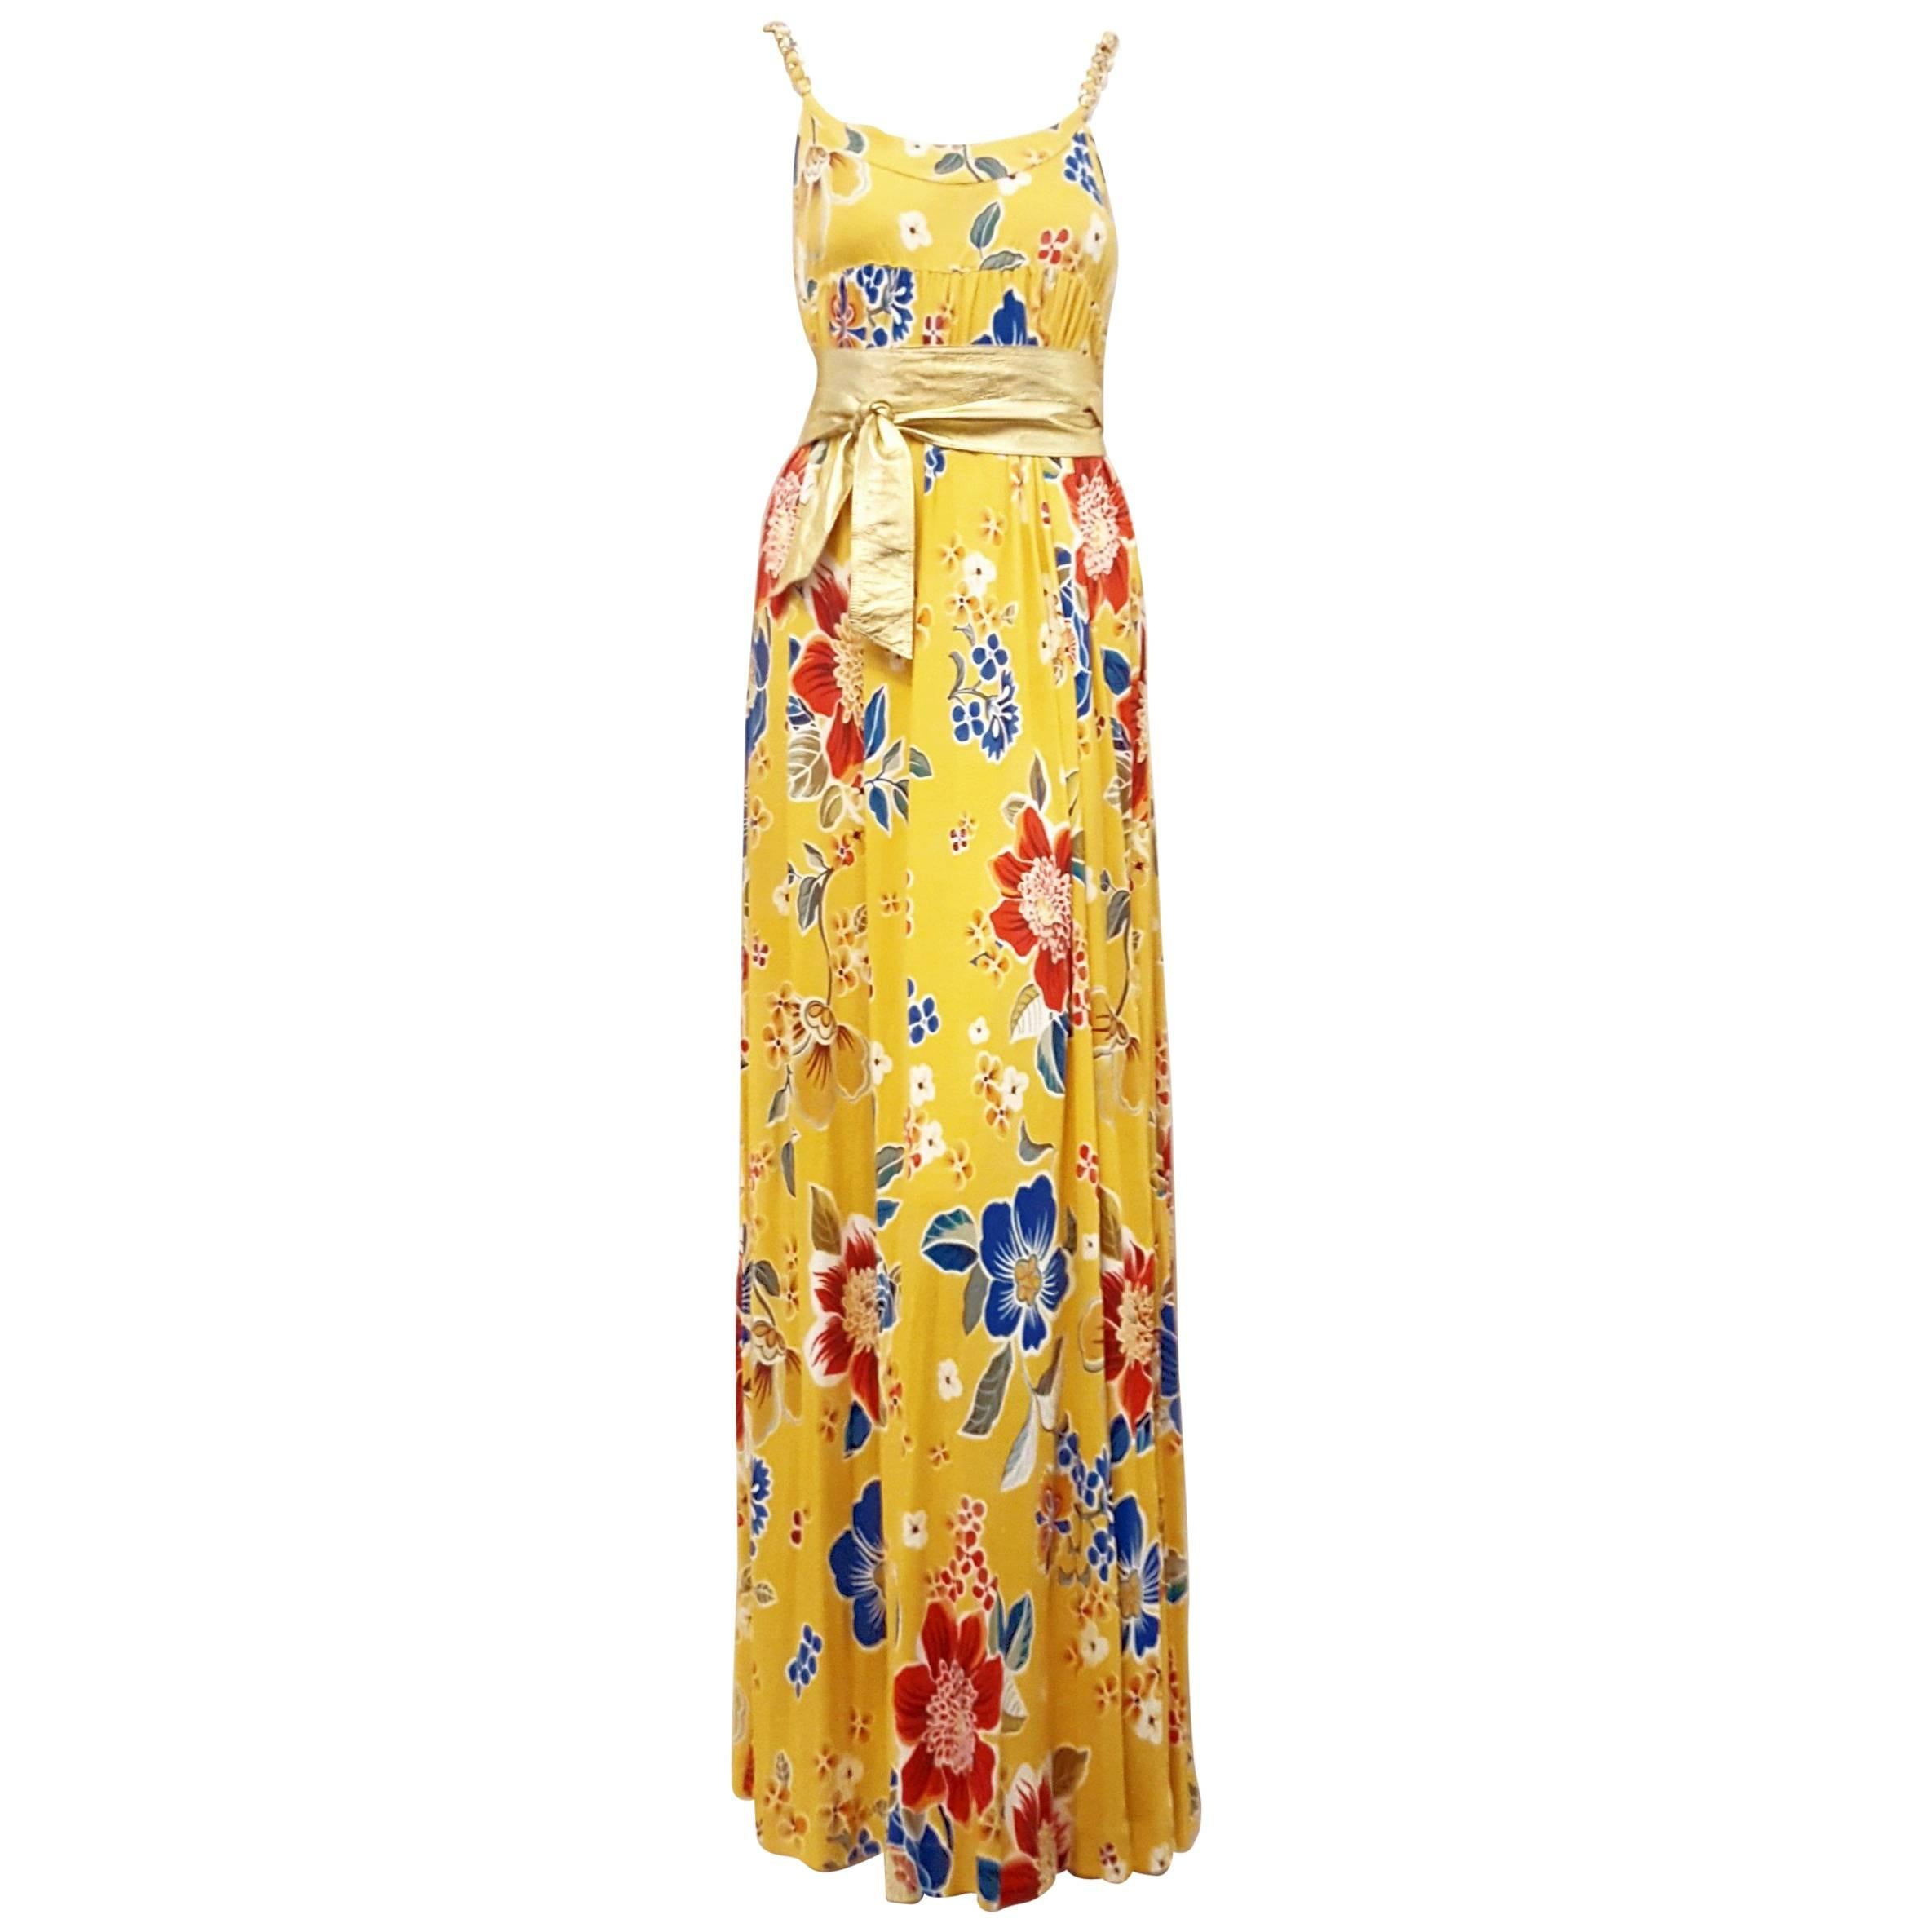 D&G Dolce & Gabbana Yellow Floral Empire Waist Dress with Gold Tone Leather Belt For Sale